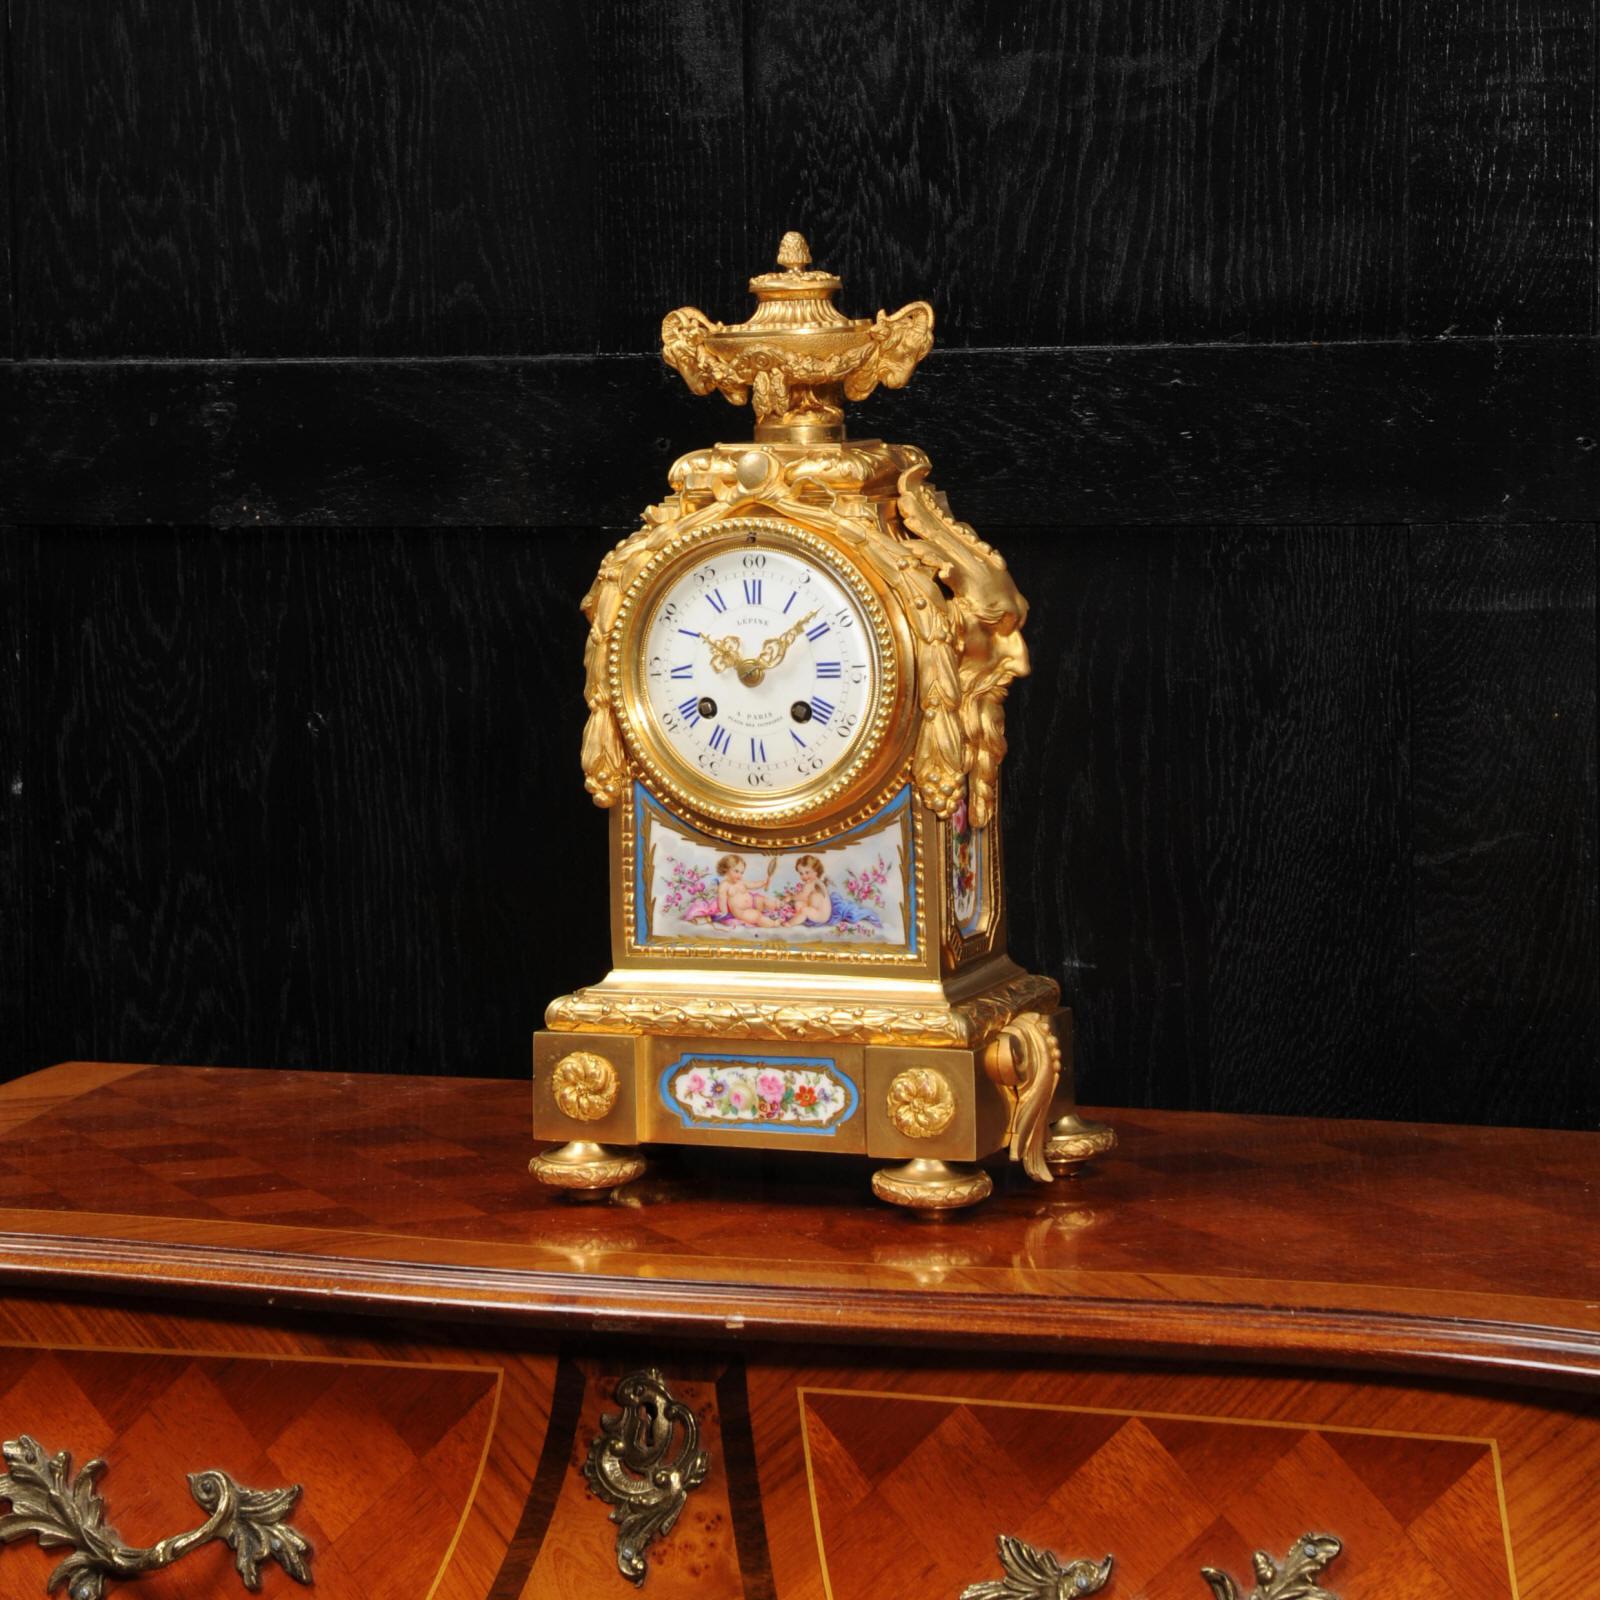 A fine and early clock by Lépine Paris, circa 1840. It is beautifully made in ormolu (finely gilded bronze doré) and mounted with exquisite Sèvres style porcelain with a blue ground. The panel below the dial features an exquisite scene of two winged